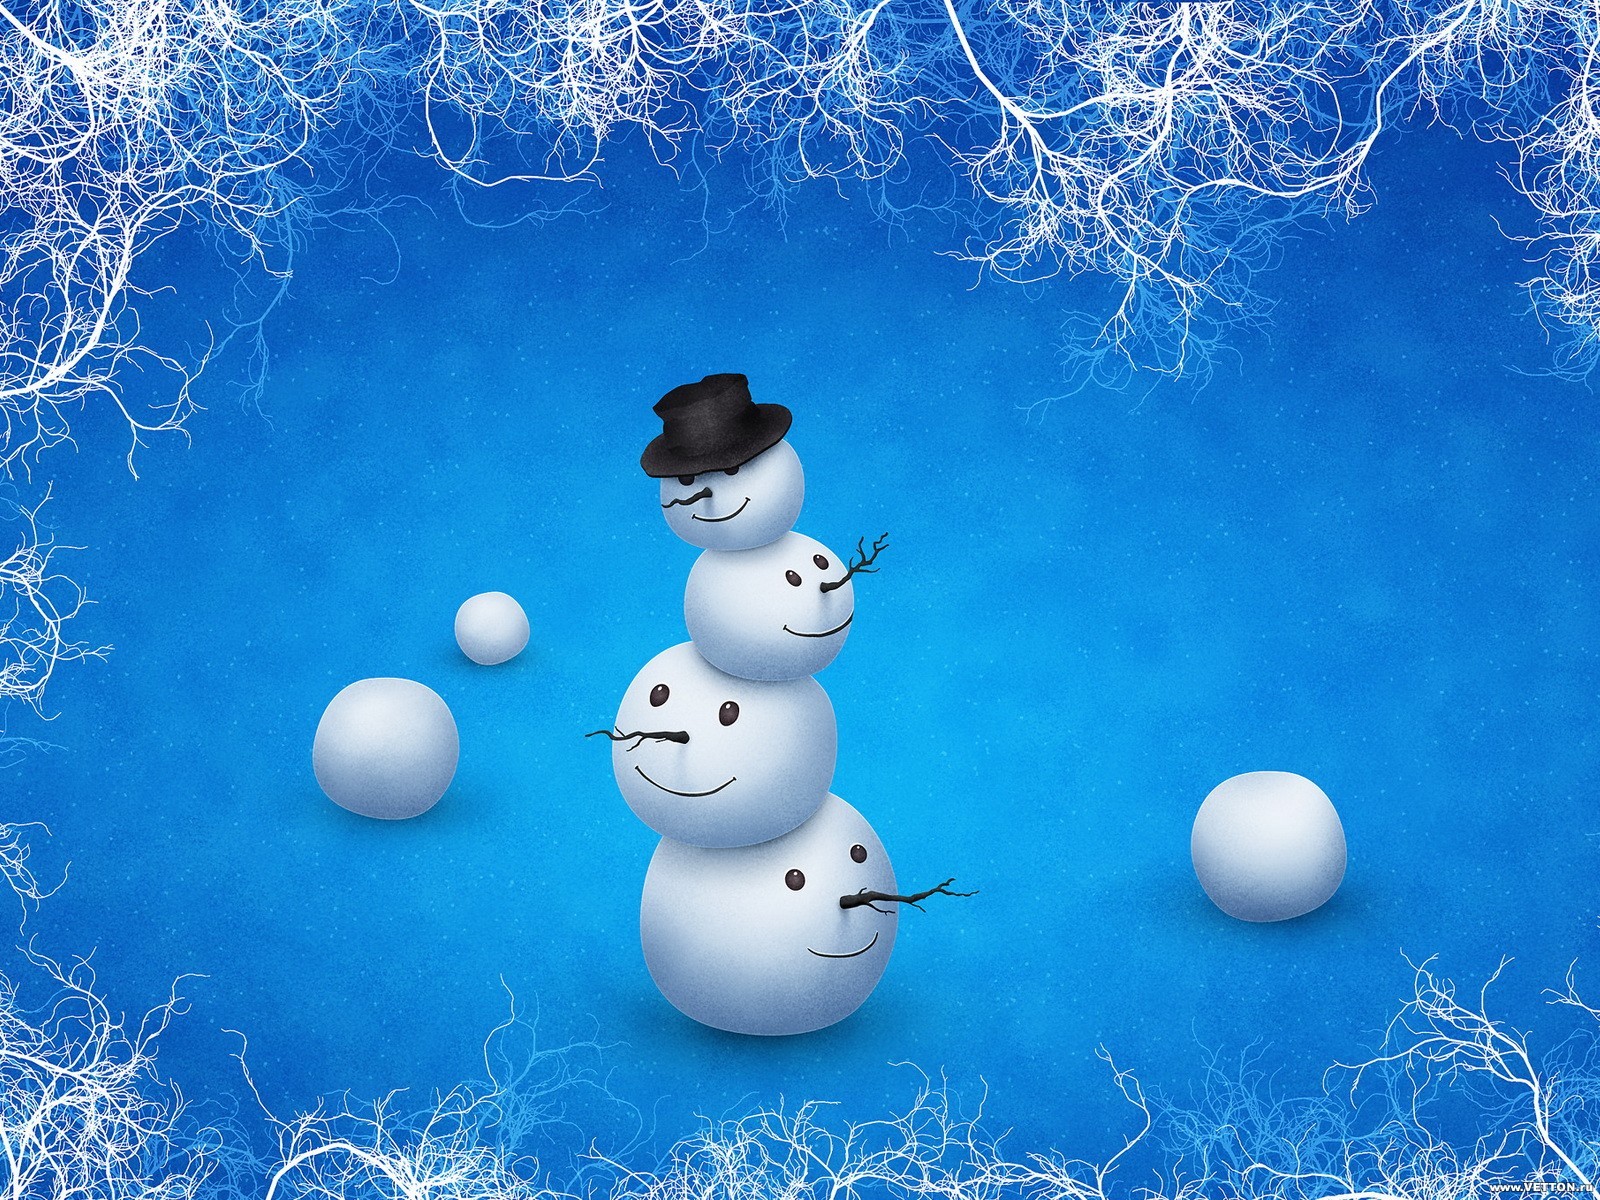 Download PC Wallpaper holidays, winter, new year, christmas xmas, pictures, snowman, blue